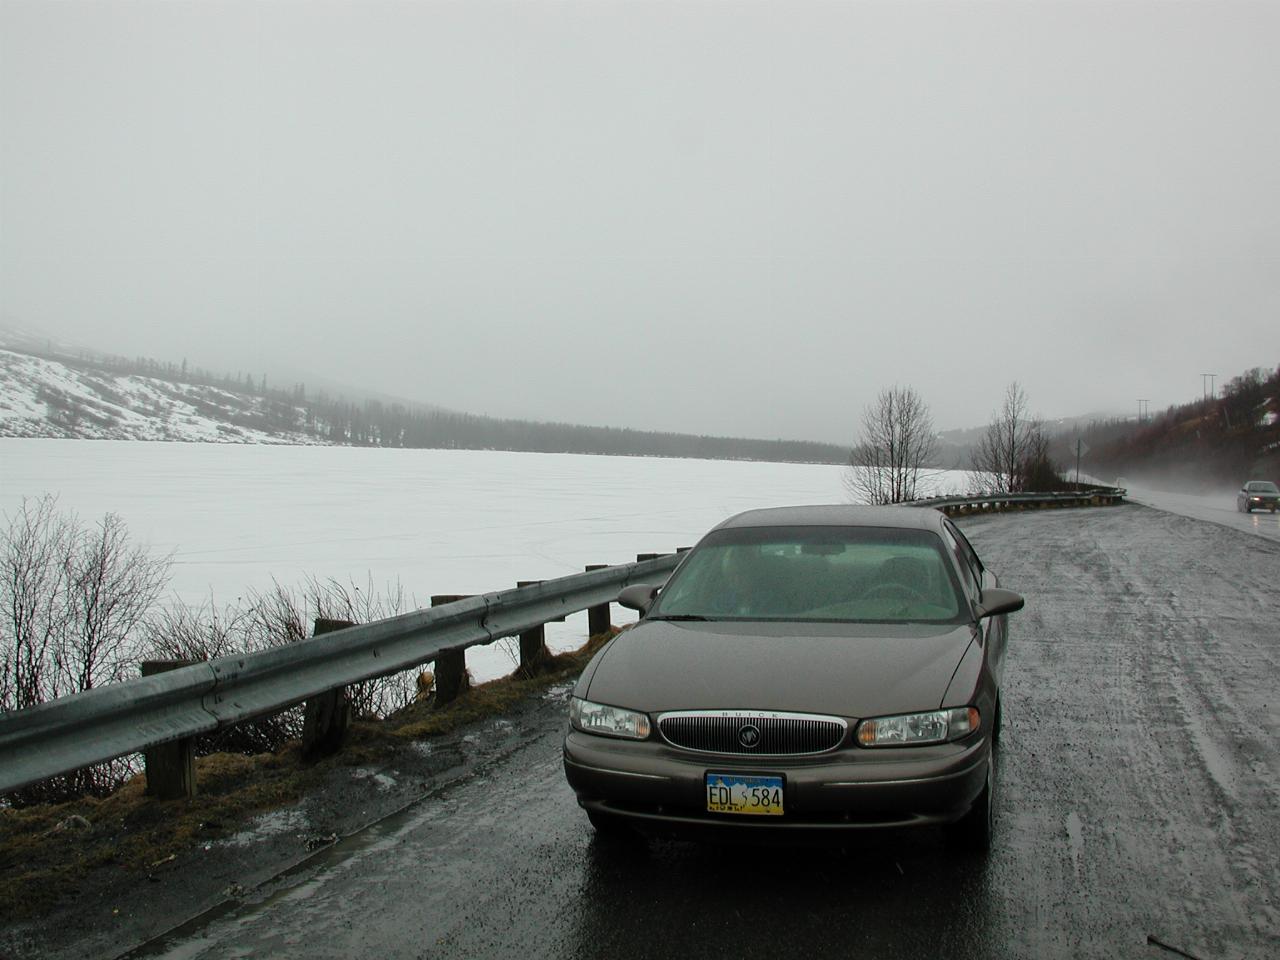 Another frozen lake and our rental car